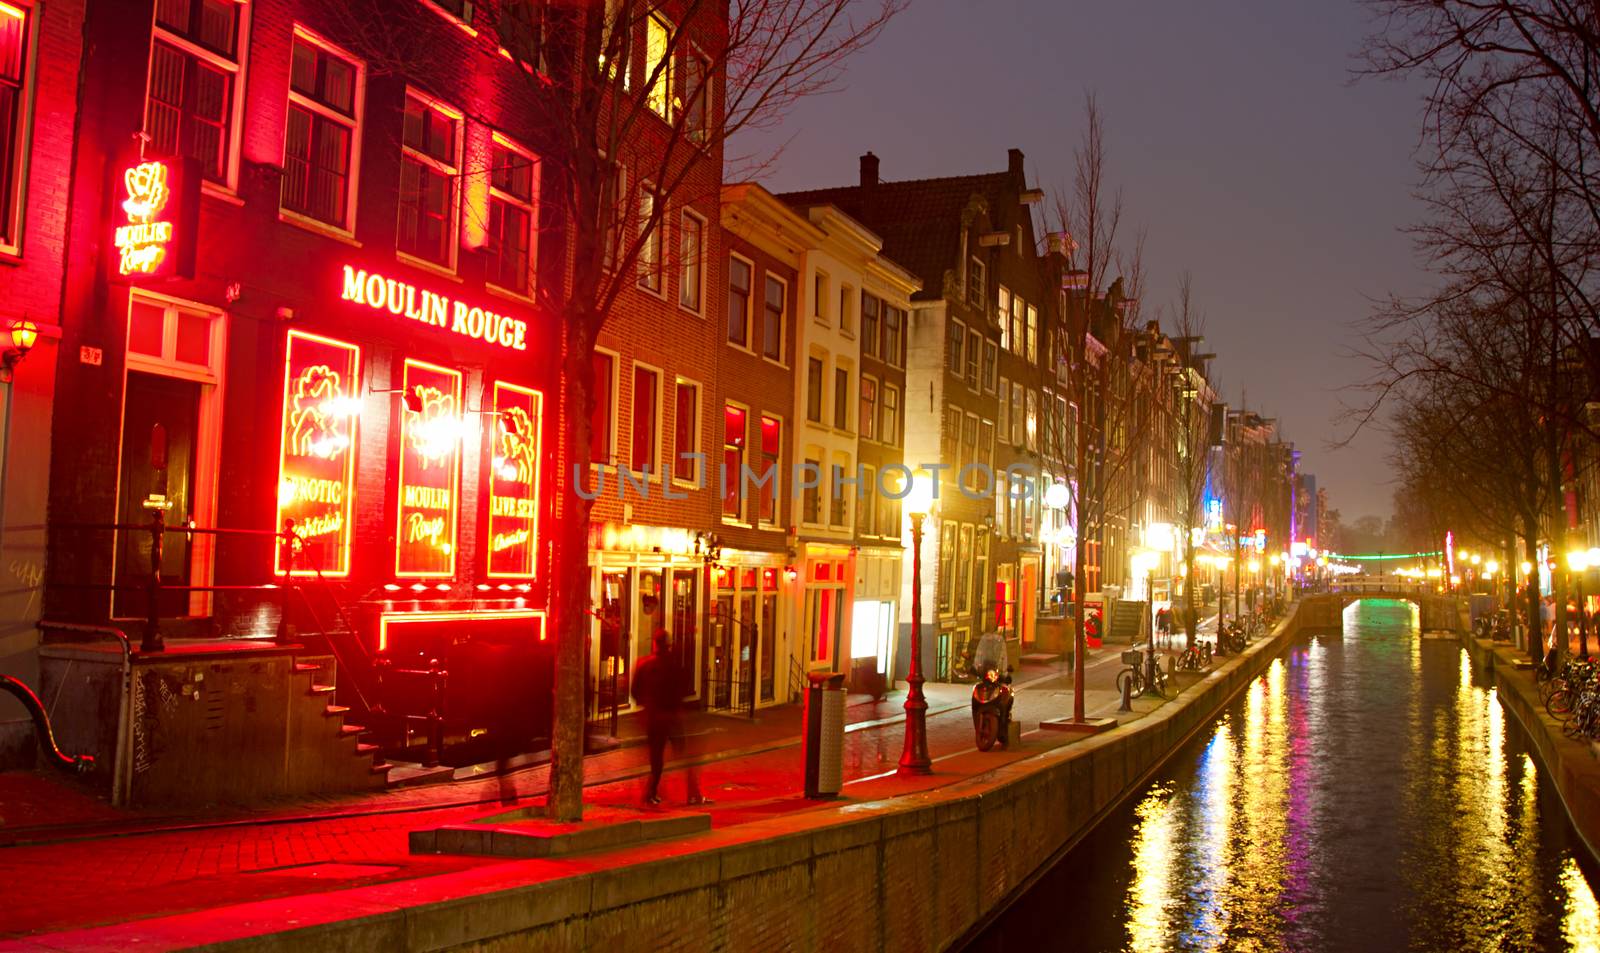 AMSTERDAM, NETHERLANDS - MARCH 10, 2013: Red-light district in Amsterdam. There are about three hundred cabins rented by prostitutes in the area.